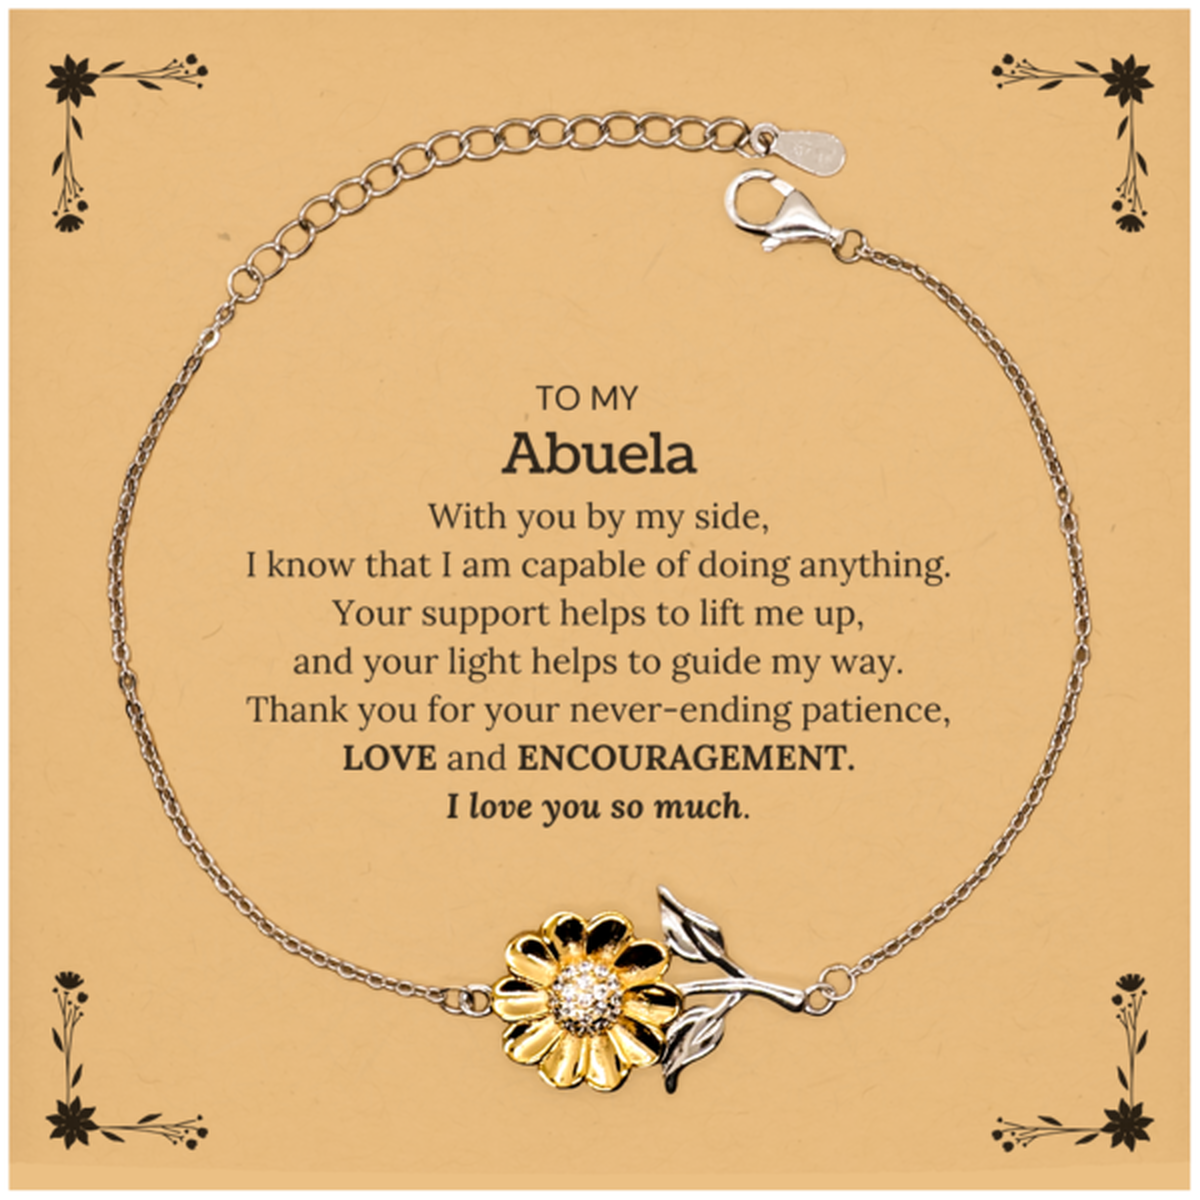 Appreciation Abuela Sunflower Bracelet Gifts, To My Abuela Birthday Christmas Wedding Keepsake Gifts for Abuela With you by my side, I know that I am capable of doing anything. I love you so much